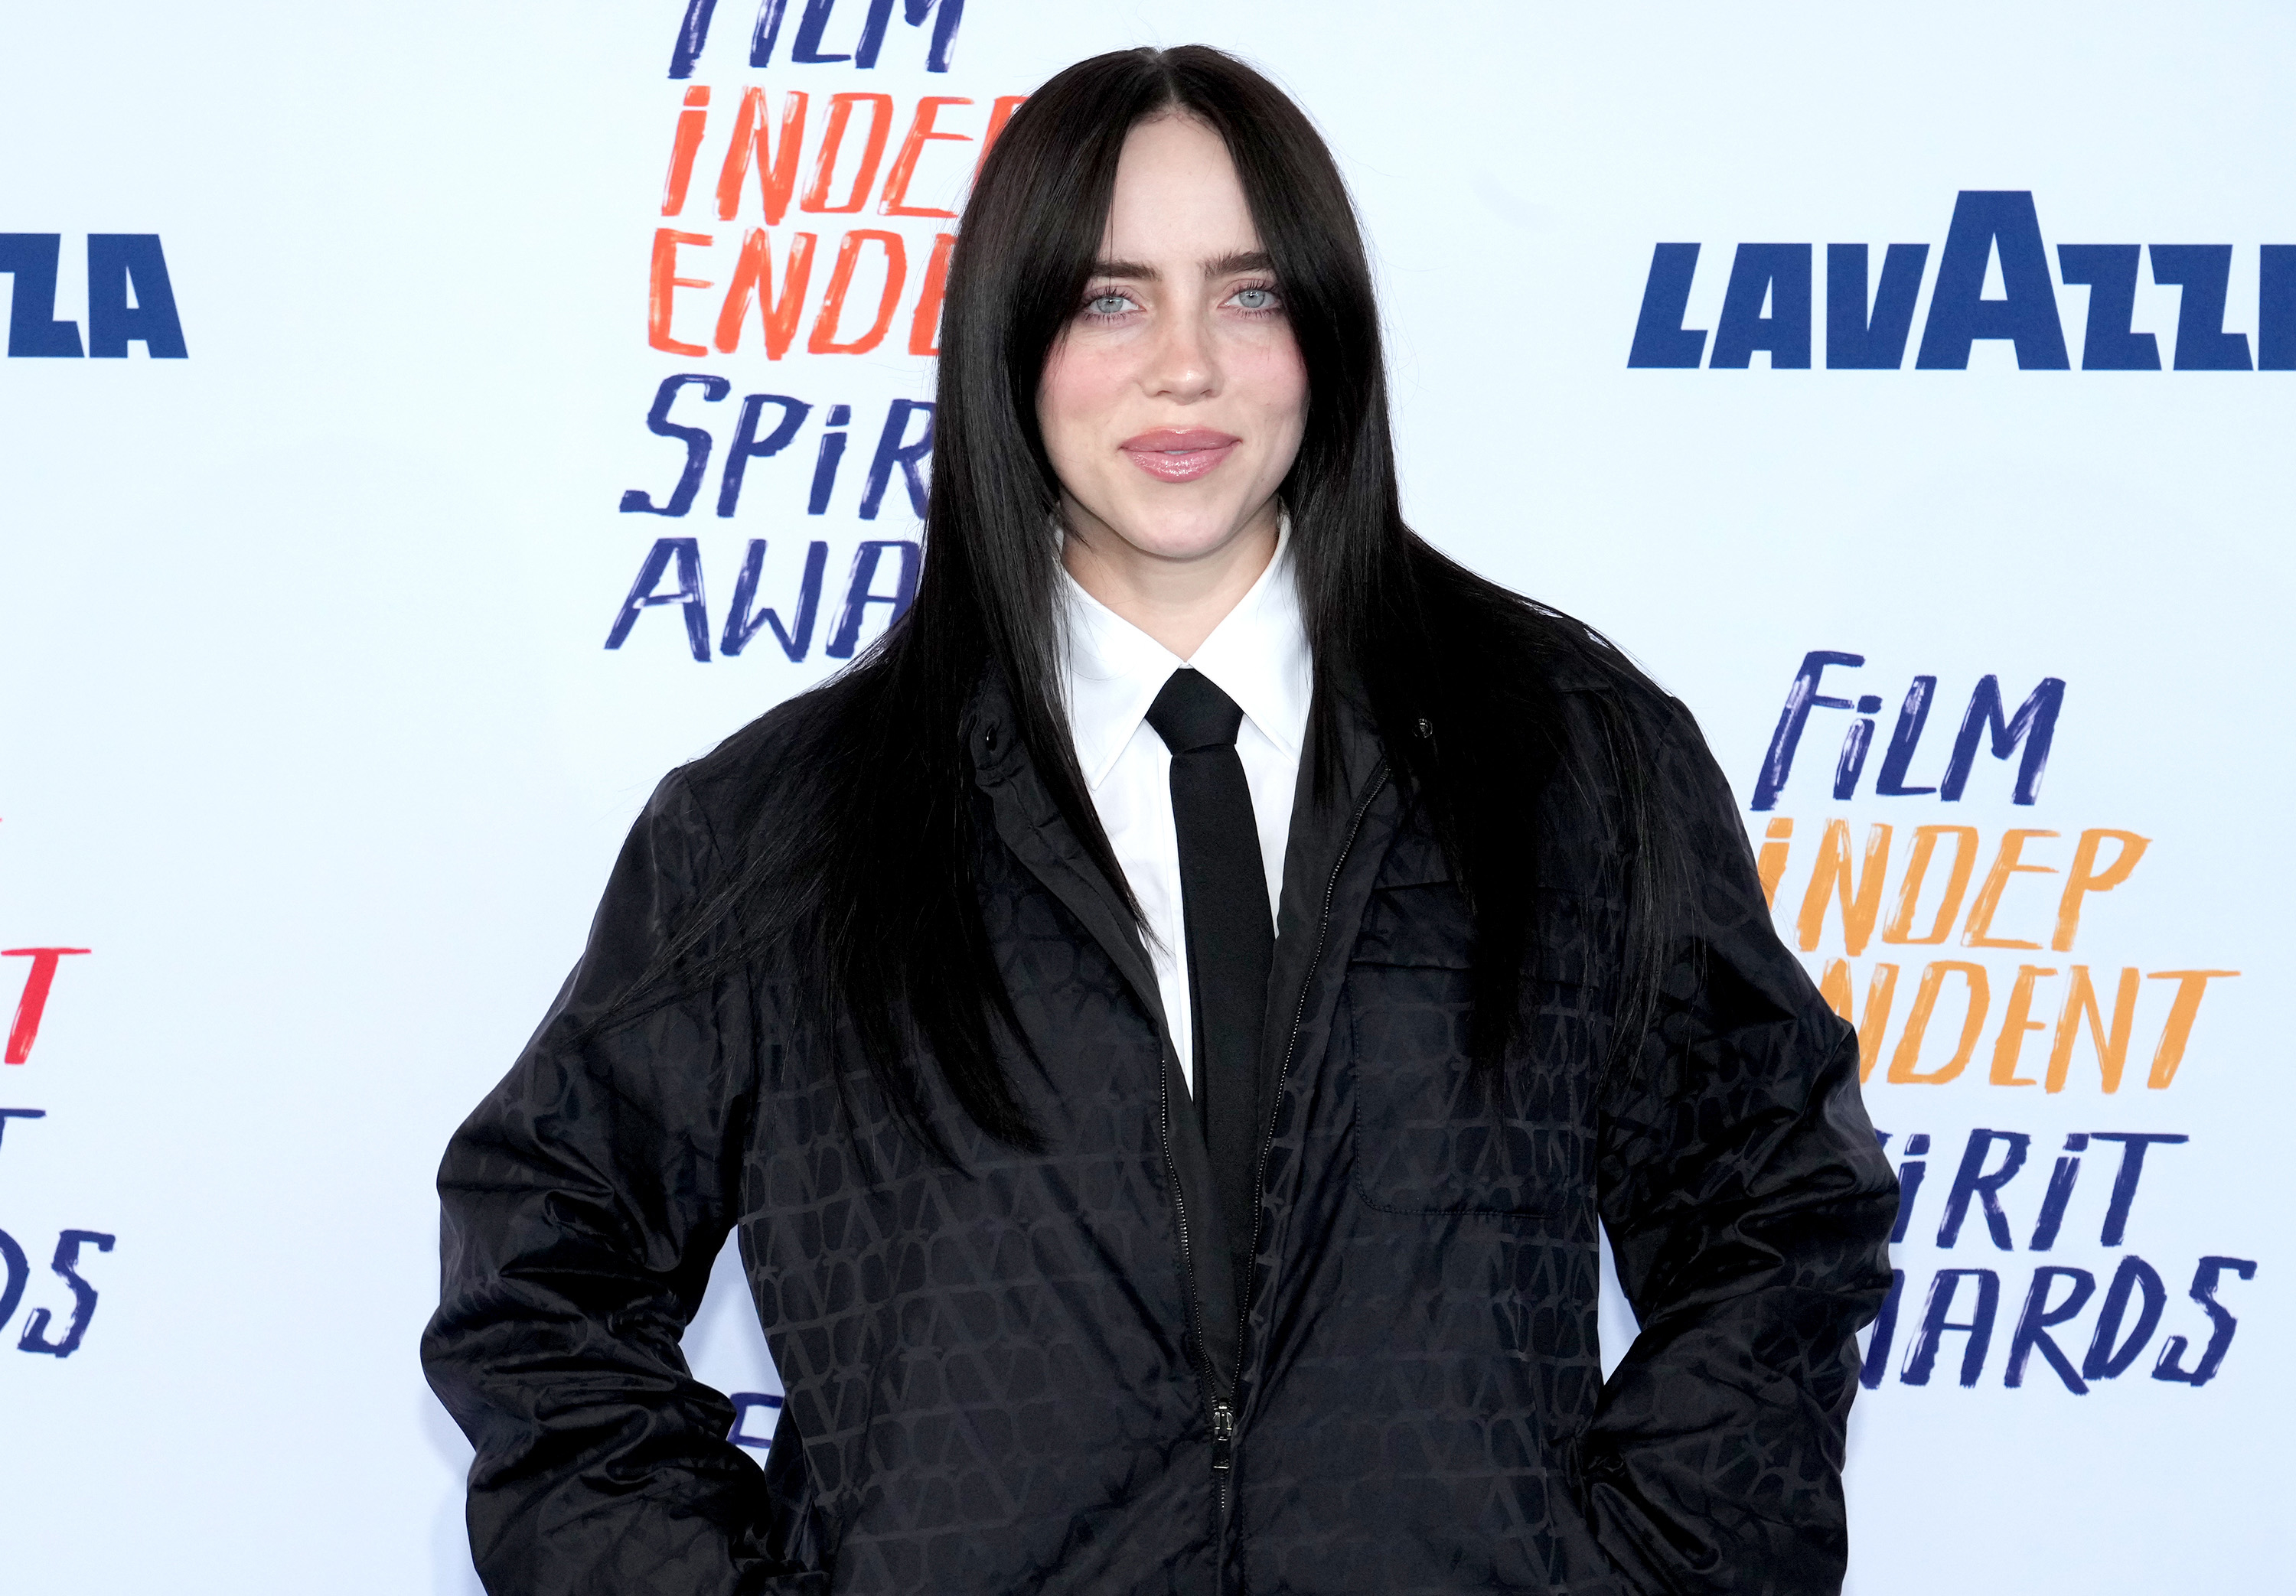 Billie Eilish wearing an oversized patterned coat and tie, hands in pockets, at the Film Independent Spirit Awards